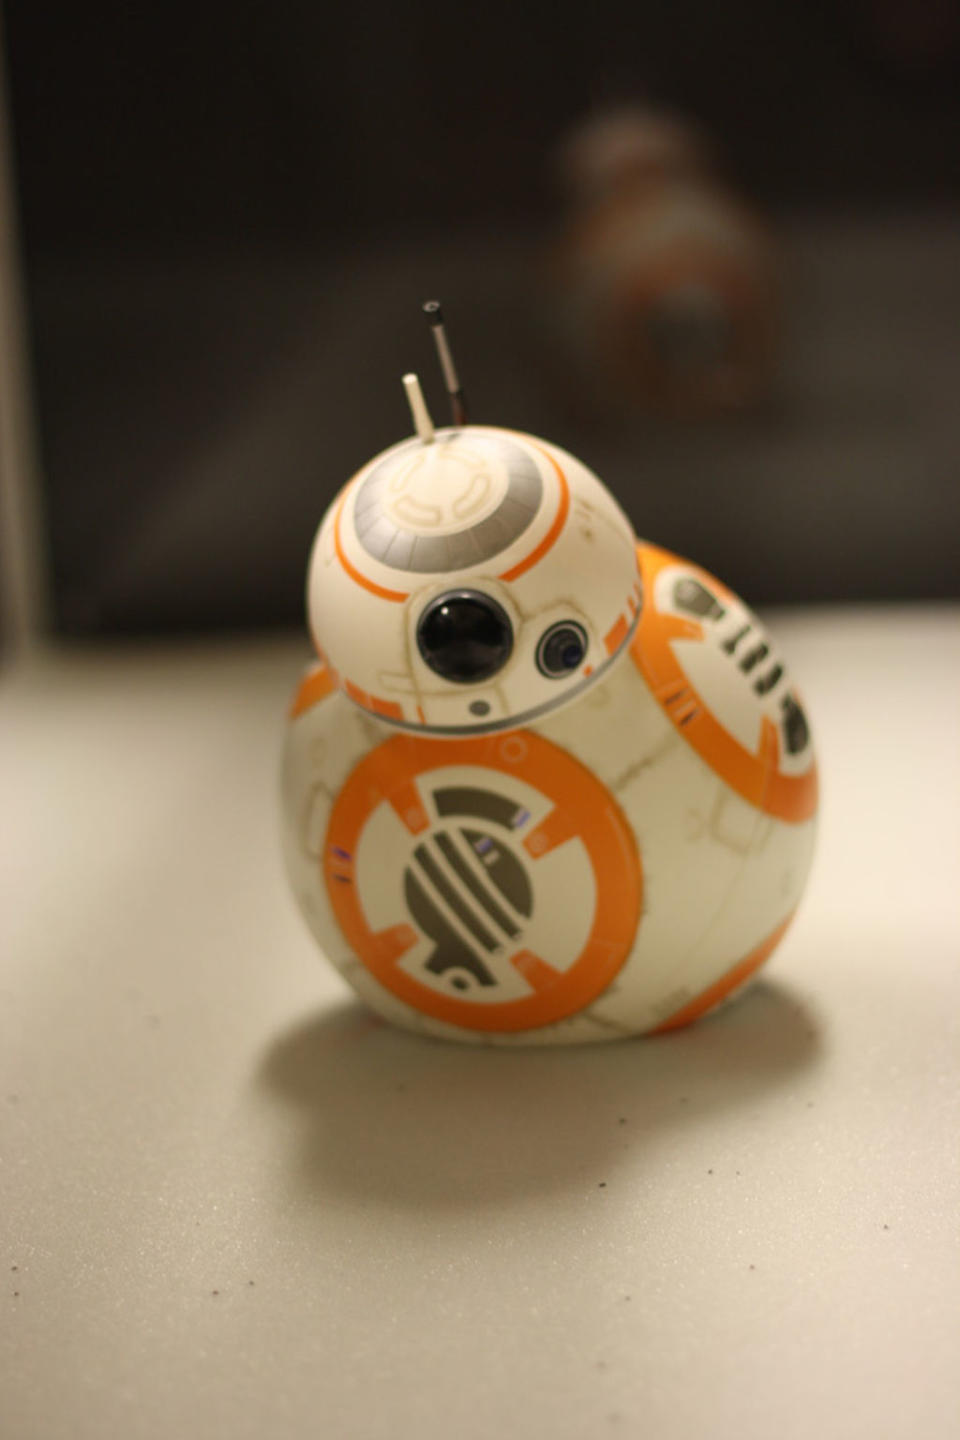 The "Star Wars" droid BB-8 (or at least its remote-control alter ego) is trapped in a sand-like substance during a lab experiment at Georgia Tech. <cite>Yasemin Ozkan Aydin/Daniel I. Goldman/Georgia Tech</cite>